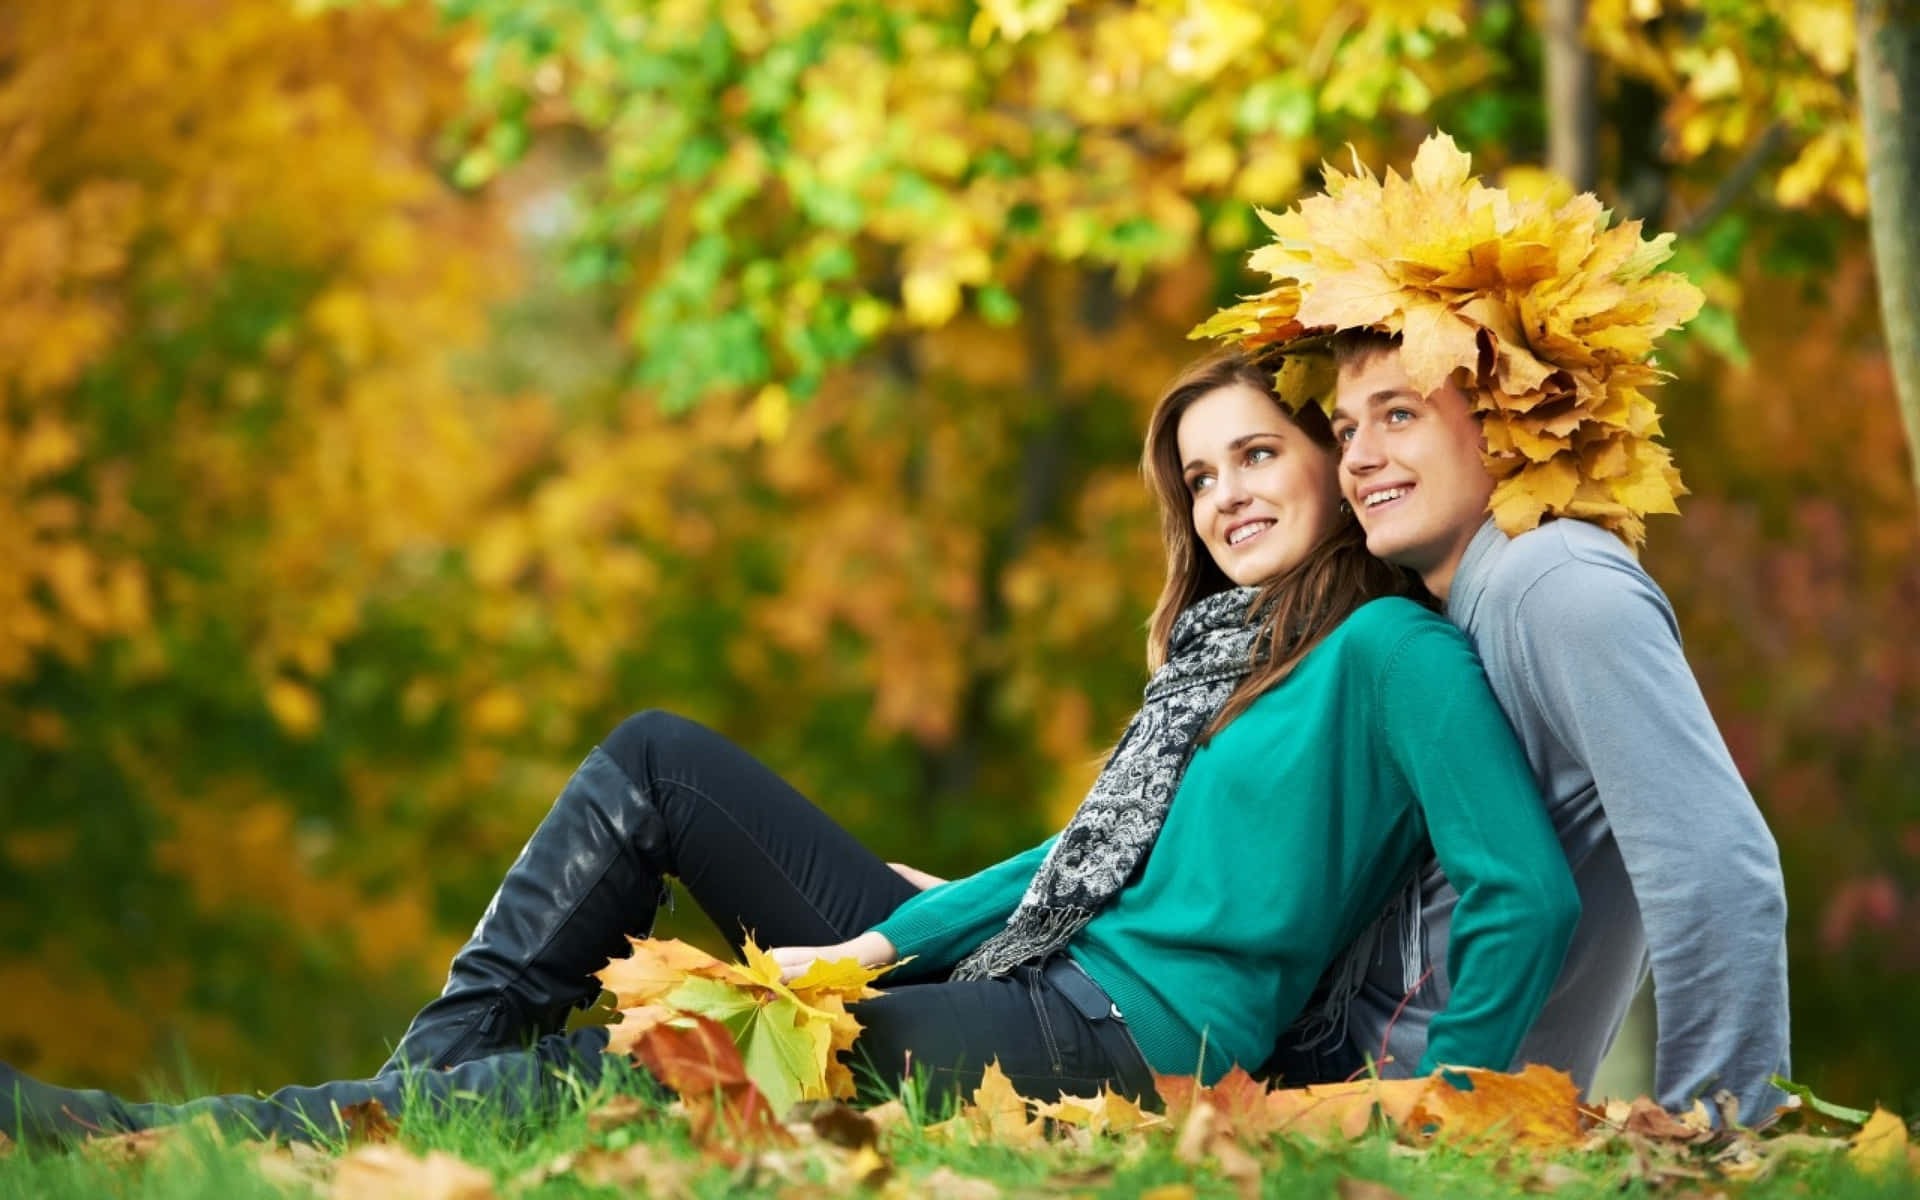 Couple Sitting In The Grass With Leaves On Their Heads